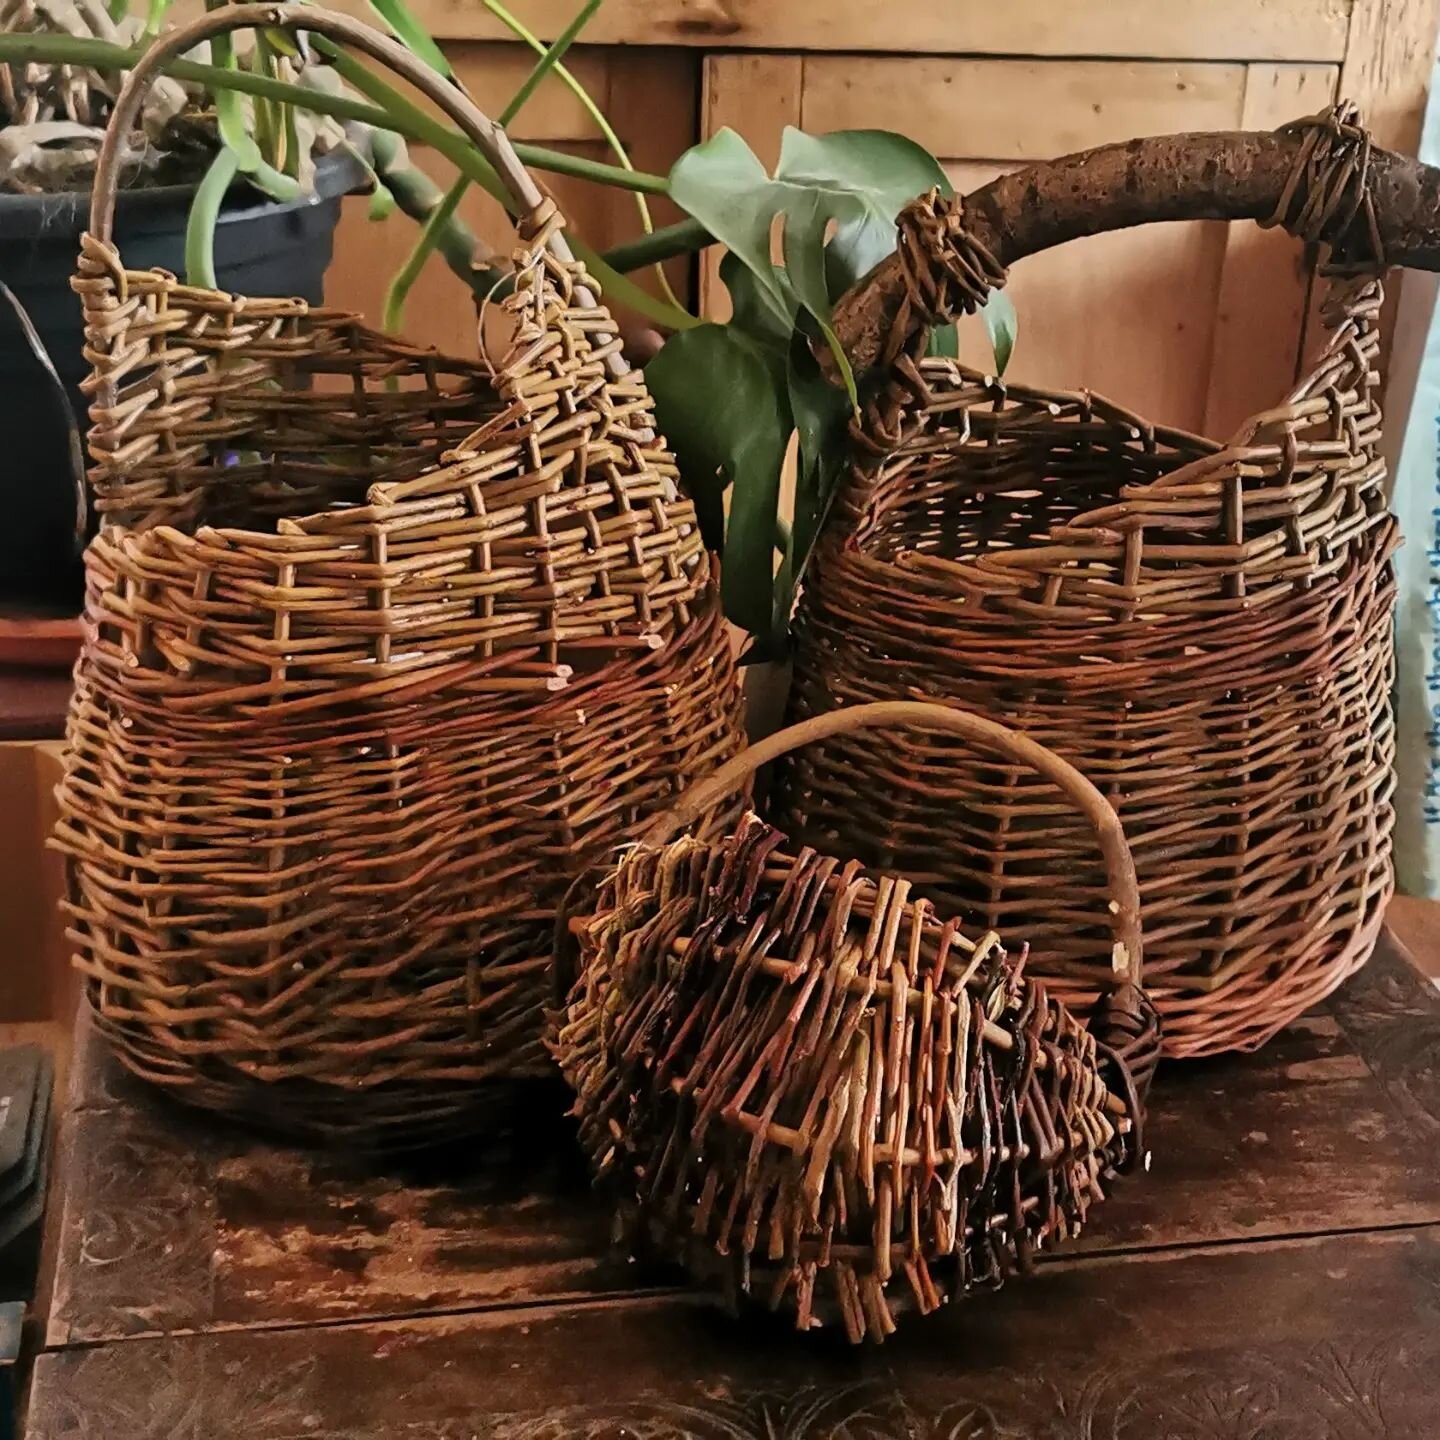 Beautiful Baskets by Angie Wickenden , new in at Salmagundi from tomorrow.